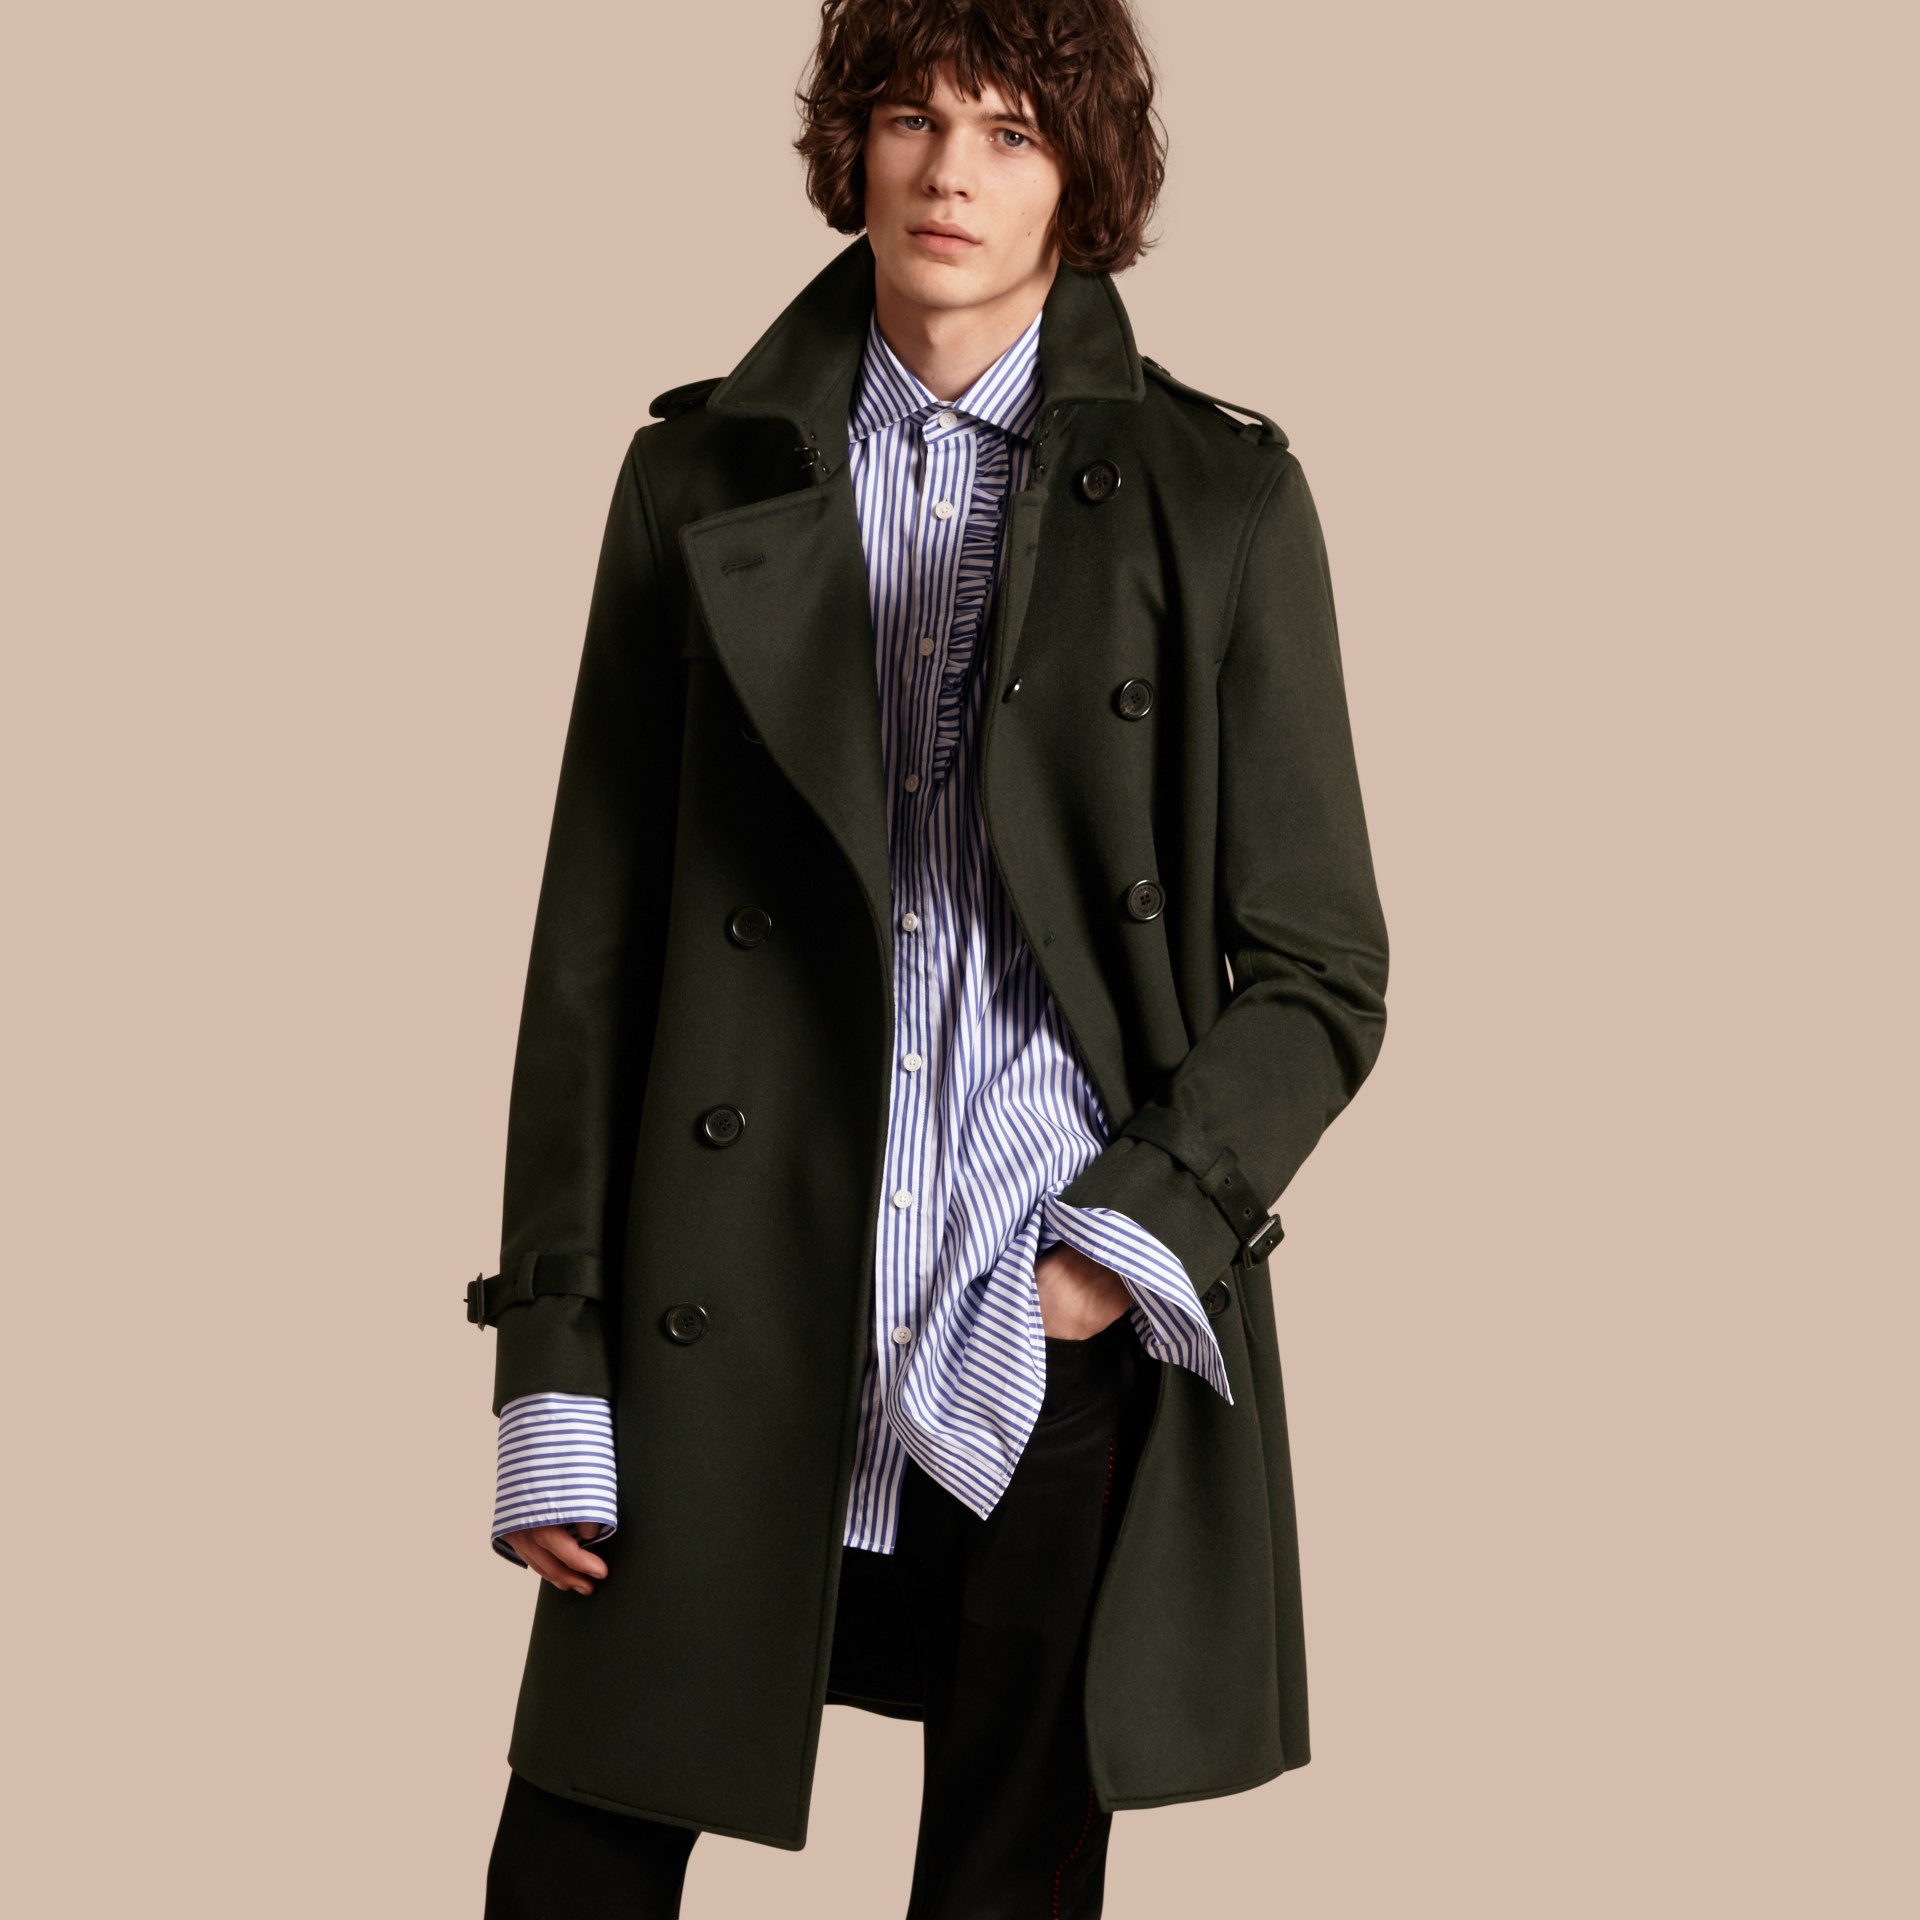 Cashmere Trench Coat in Dark Military Green - Men | Burberry United States